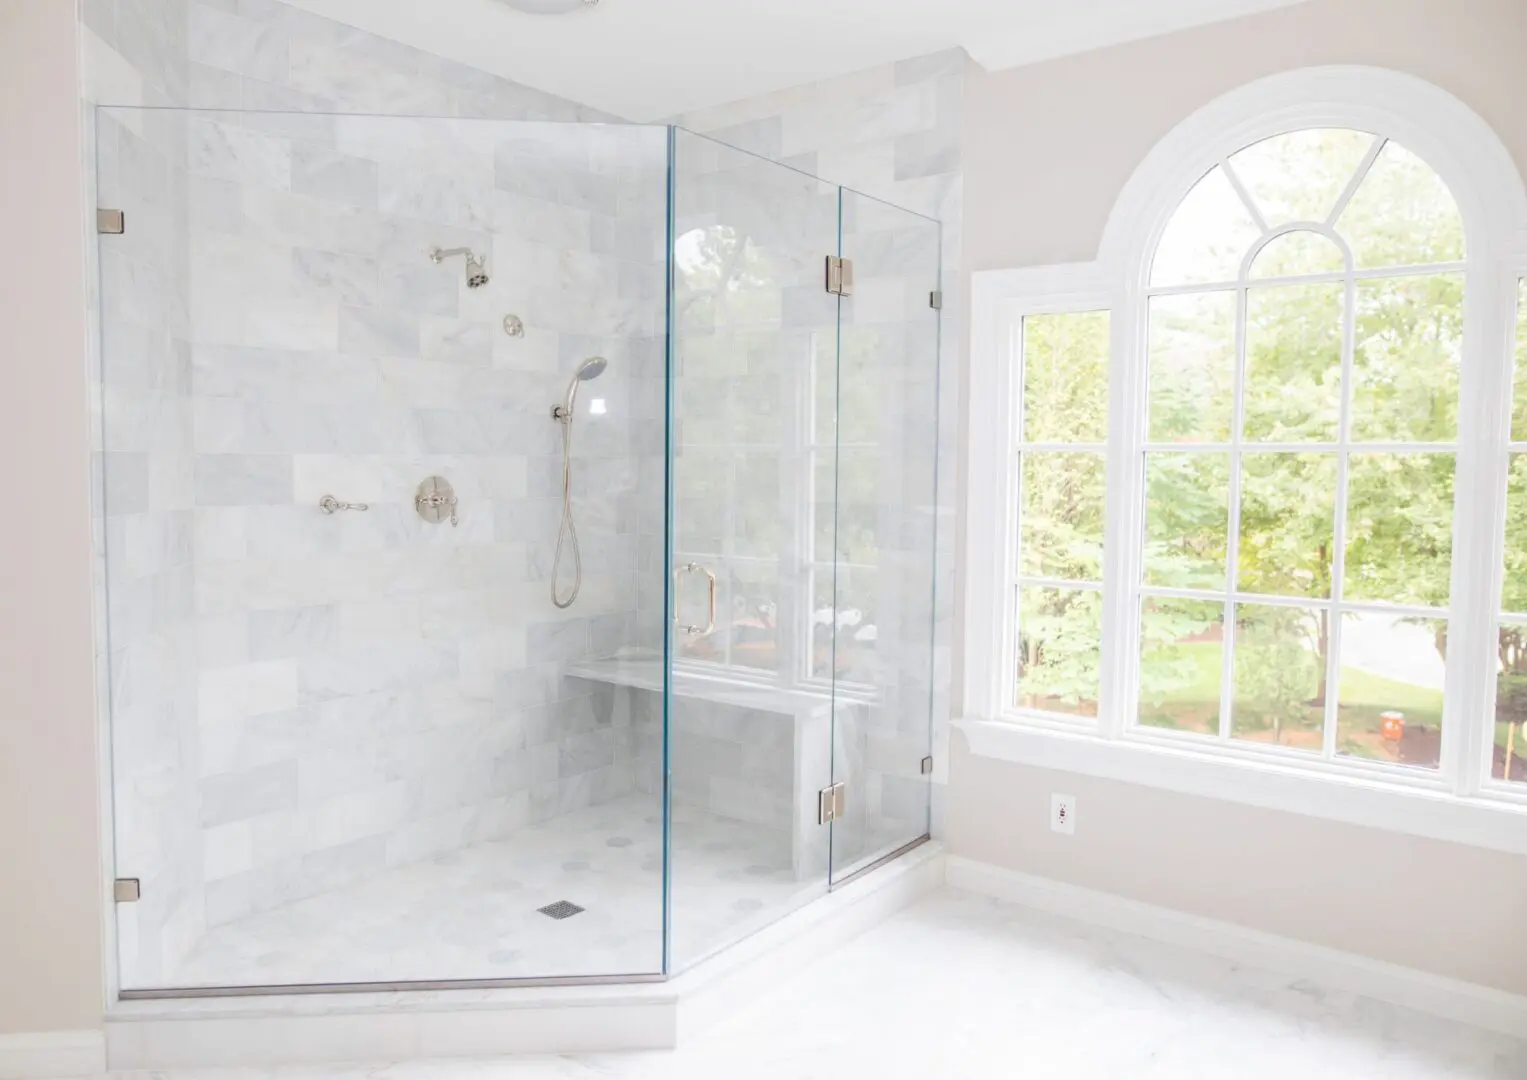 A large bathroom with a walk in shower and window.